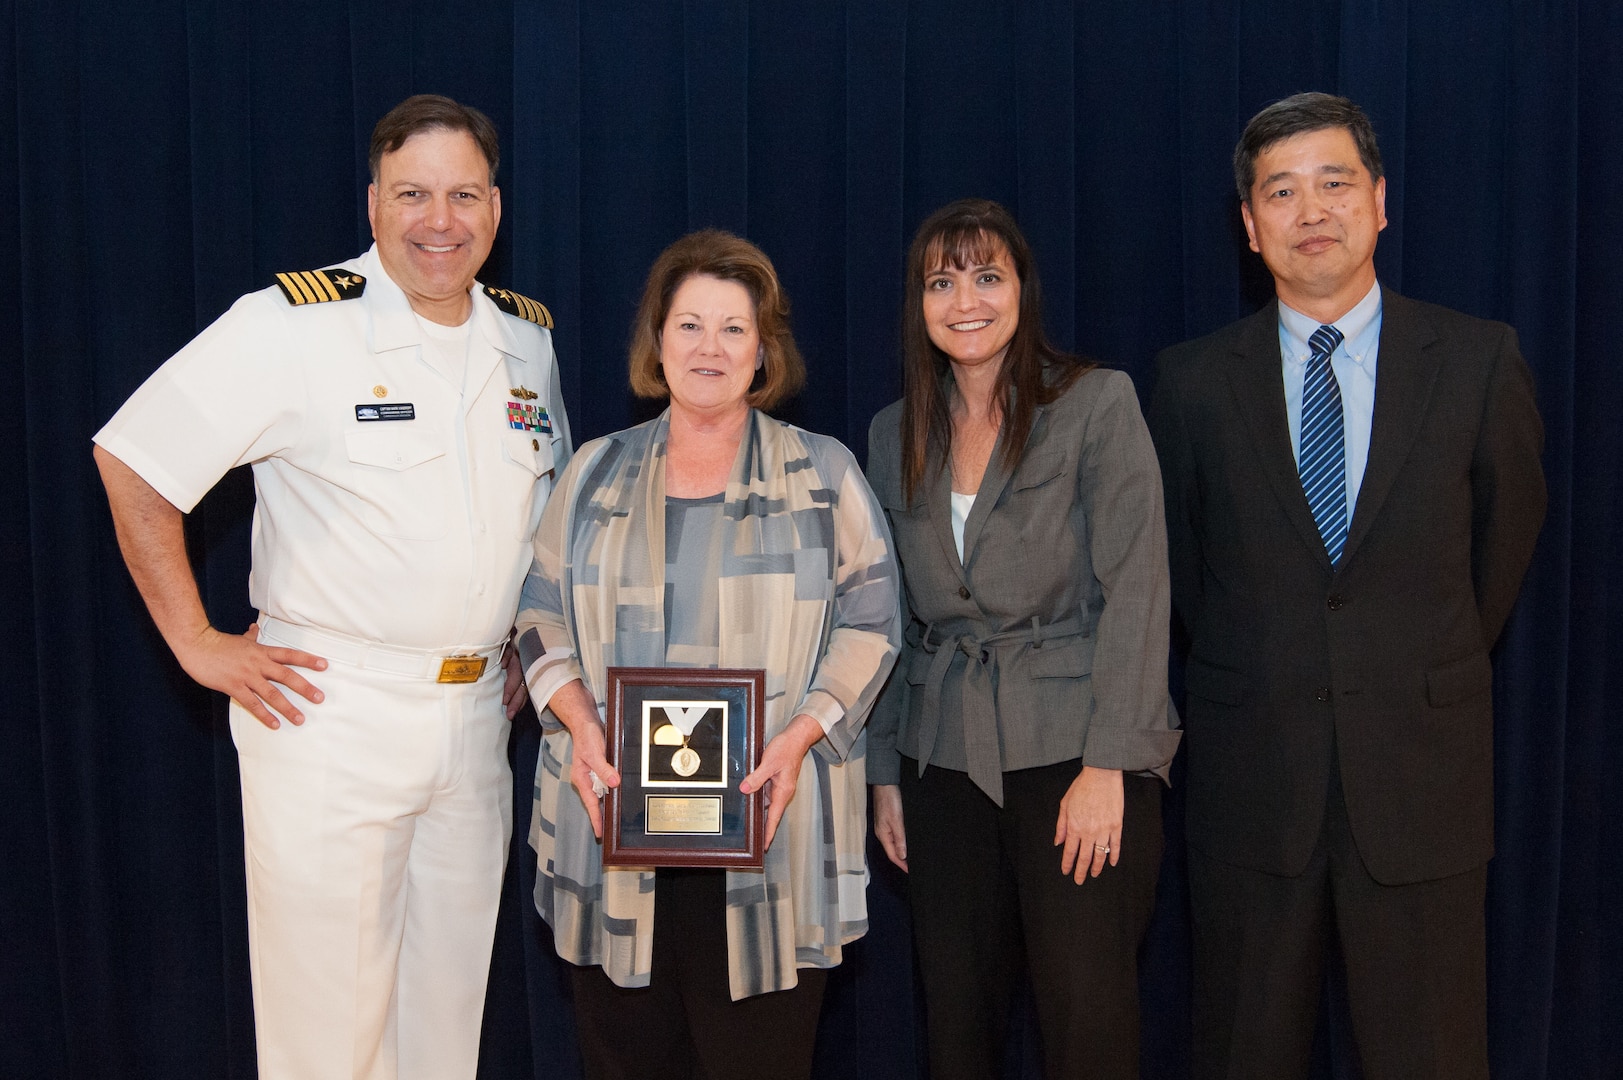 Rita M. Terhaar, Carderock's Human Resources director, receives the Rear Adm. Grace M. Hopper Award for excellence in organizational support at the Naval Surface Warfare Center, Carderock Division Honor Awards ceremony Aug. 28, 2018, in West Bethesda, Md. From left to right: Commanding Officer Capt. Mark Vandroff; Terhaar; Tamar Gallagher, head of Carderock's Corporate Operations Department; and Dr. Paul Shang, Carderock's acting technical director. (U.S. Navy photo by Nicholas Brezzell/Released)